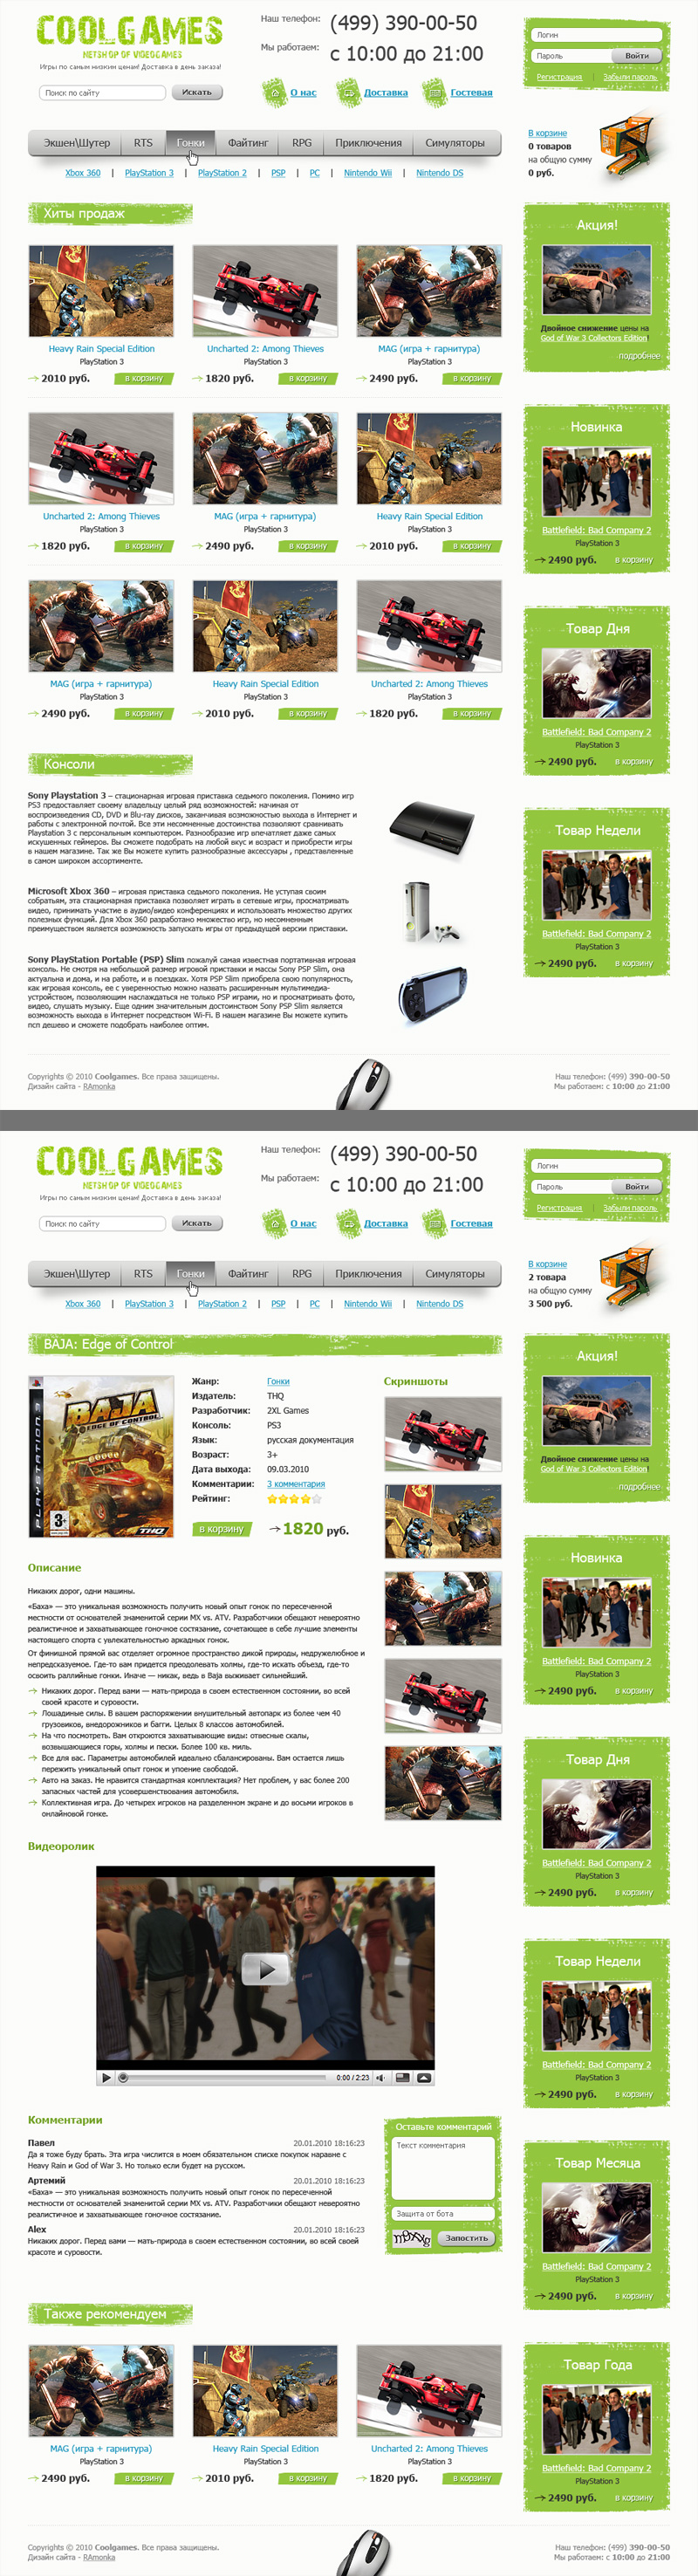 Web Design with Logo and HTML Coding for Computer Game Online Store Cool Games